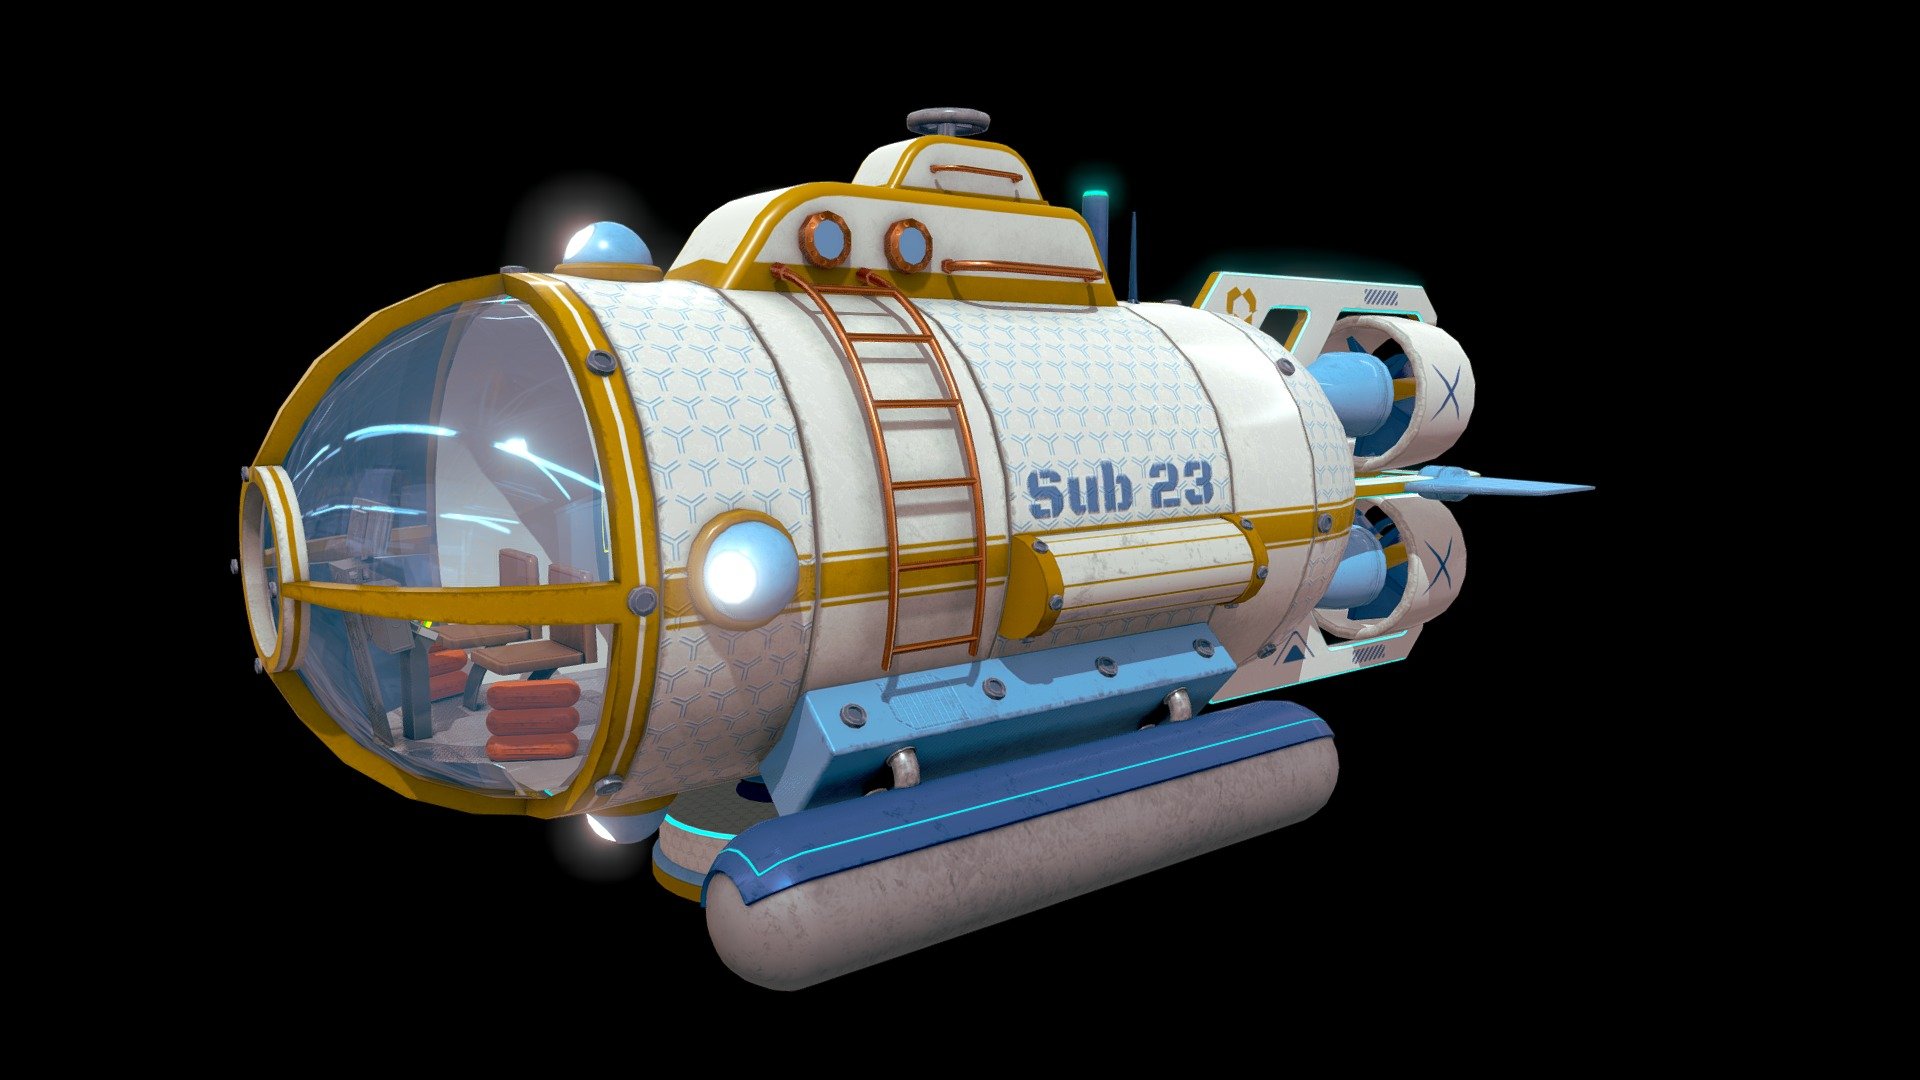 Submarine_Underwater
Around 11K Polygons
Design &amp; Model in Maya and Texture in Substance Painter
Sci-Fi Submarine Design. Good for Game and Cinematic 3d model